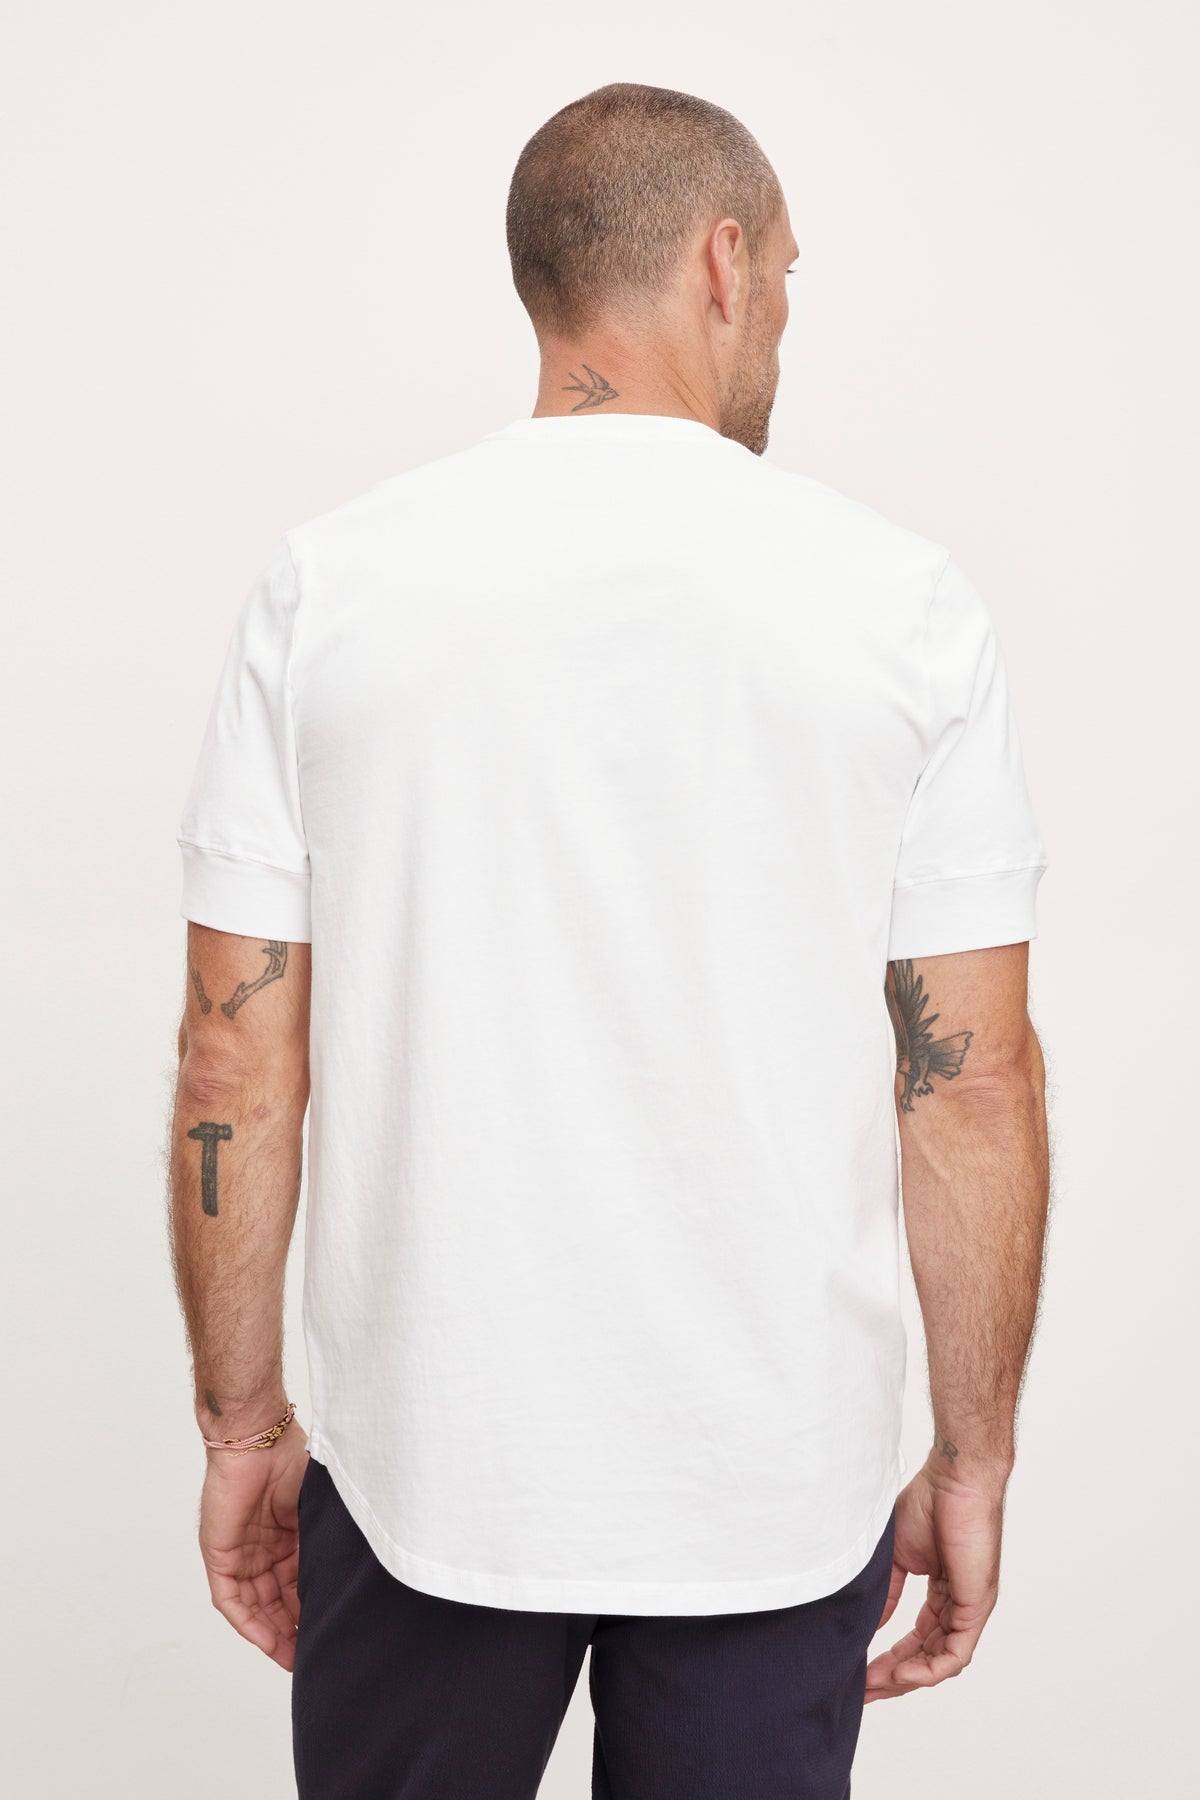 A man viewed from behind wearing a plain white short-sleeved Velvet by Graham & Spencer DEON HENLEY t-shirt and navy trousers, with visible tattoos on both arms.-36753582883009